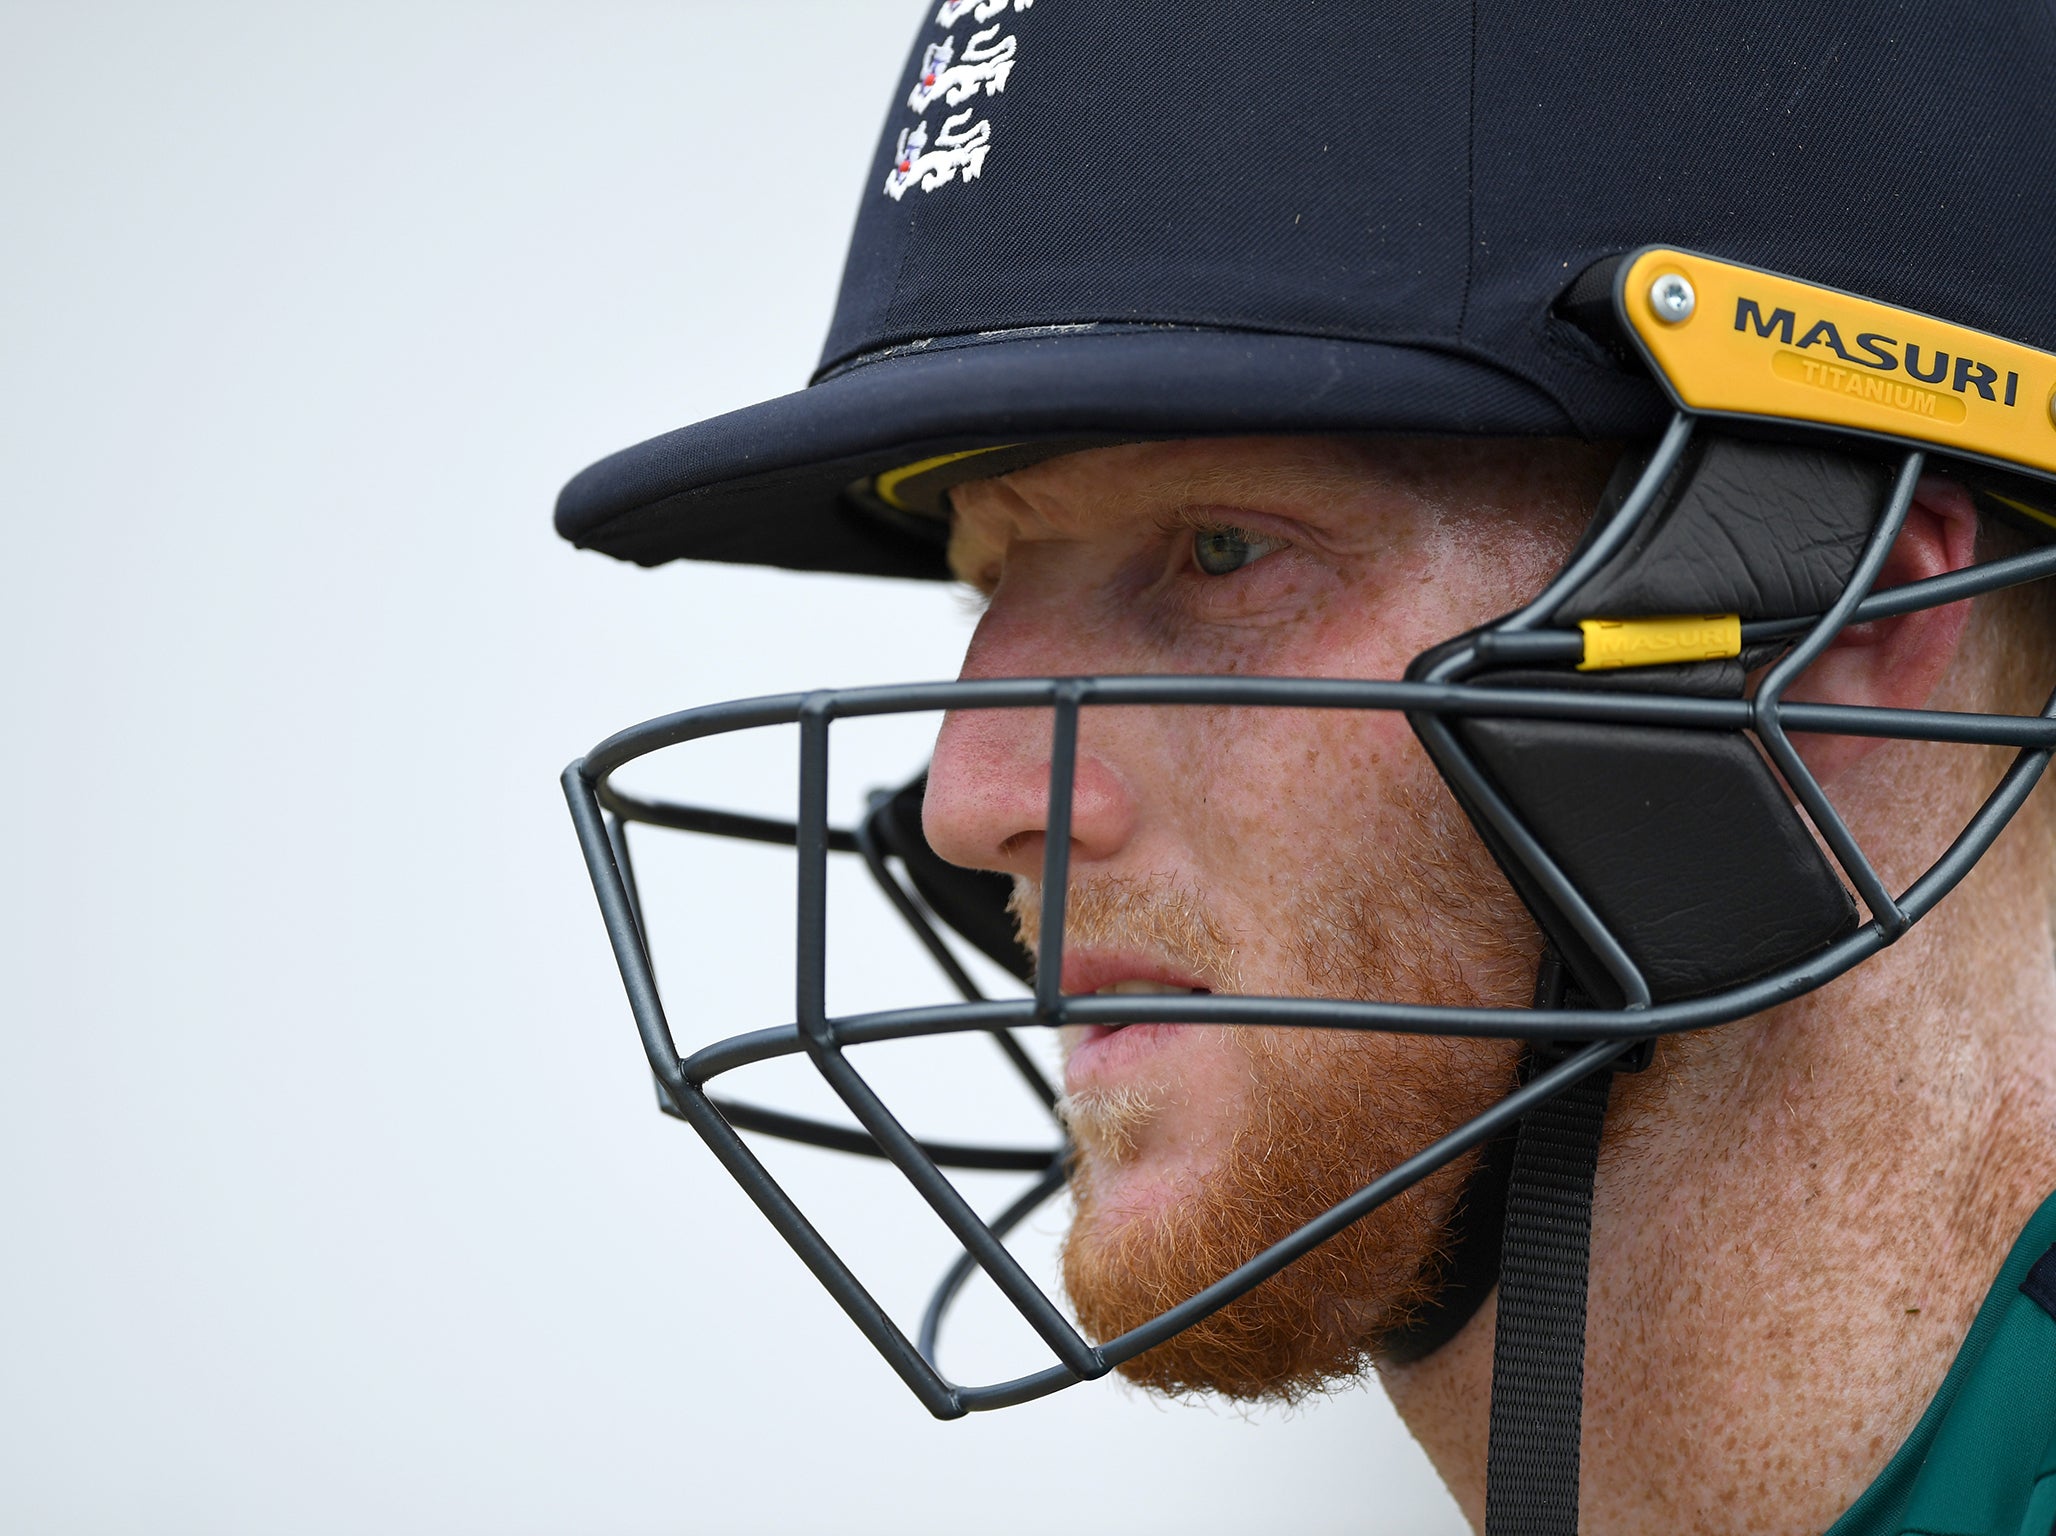 Stokes has thrown his place on the Ashes tour into jeopardy